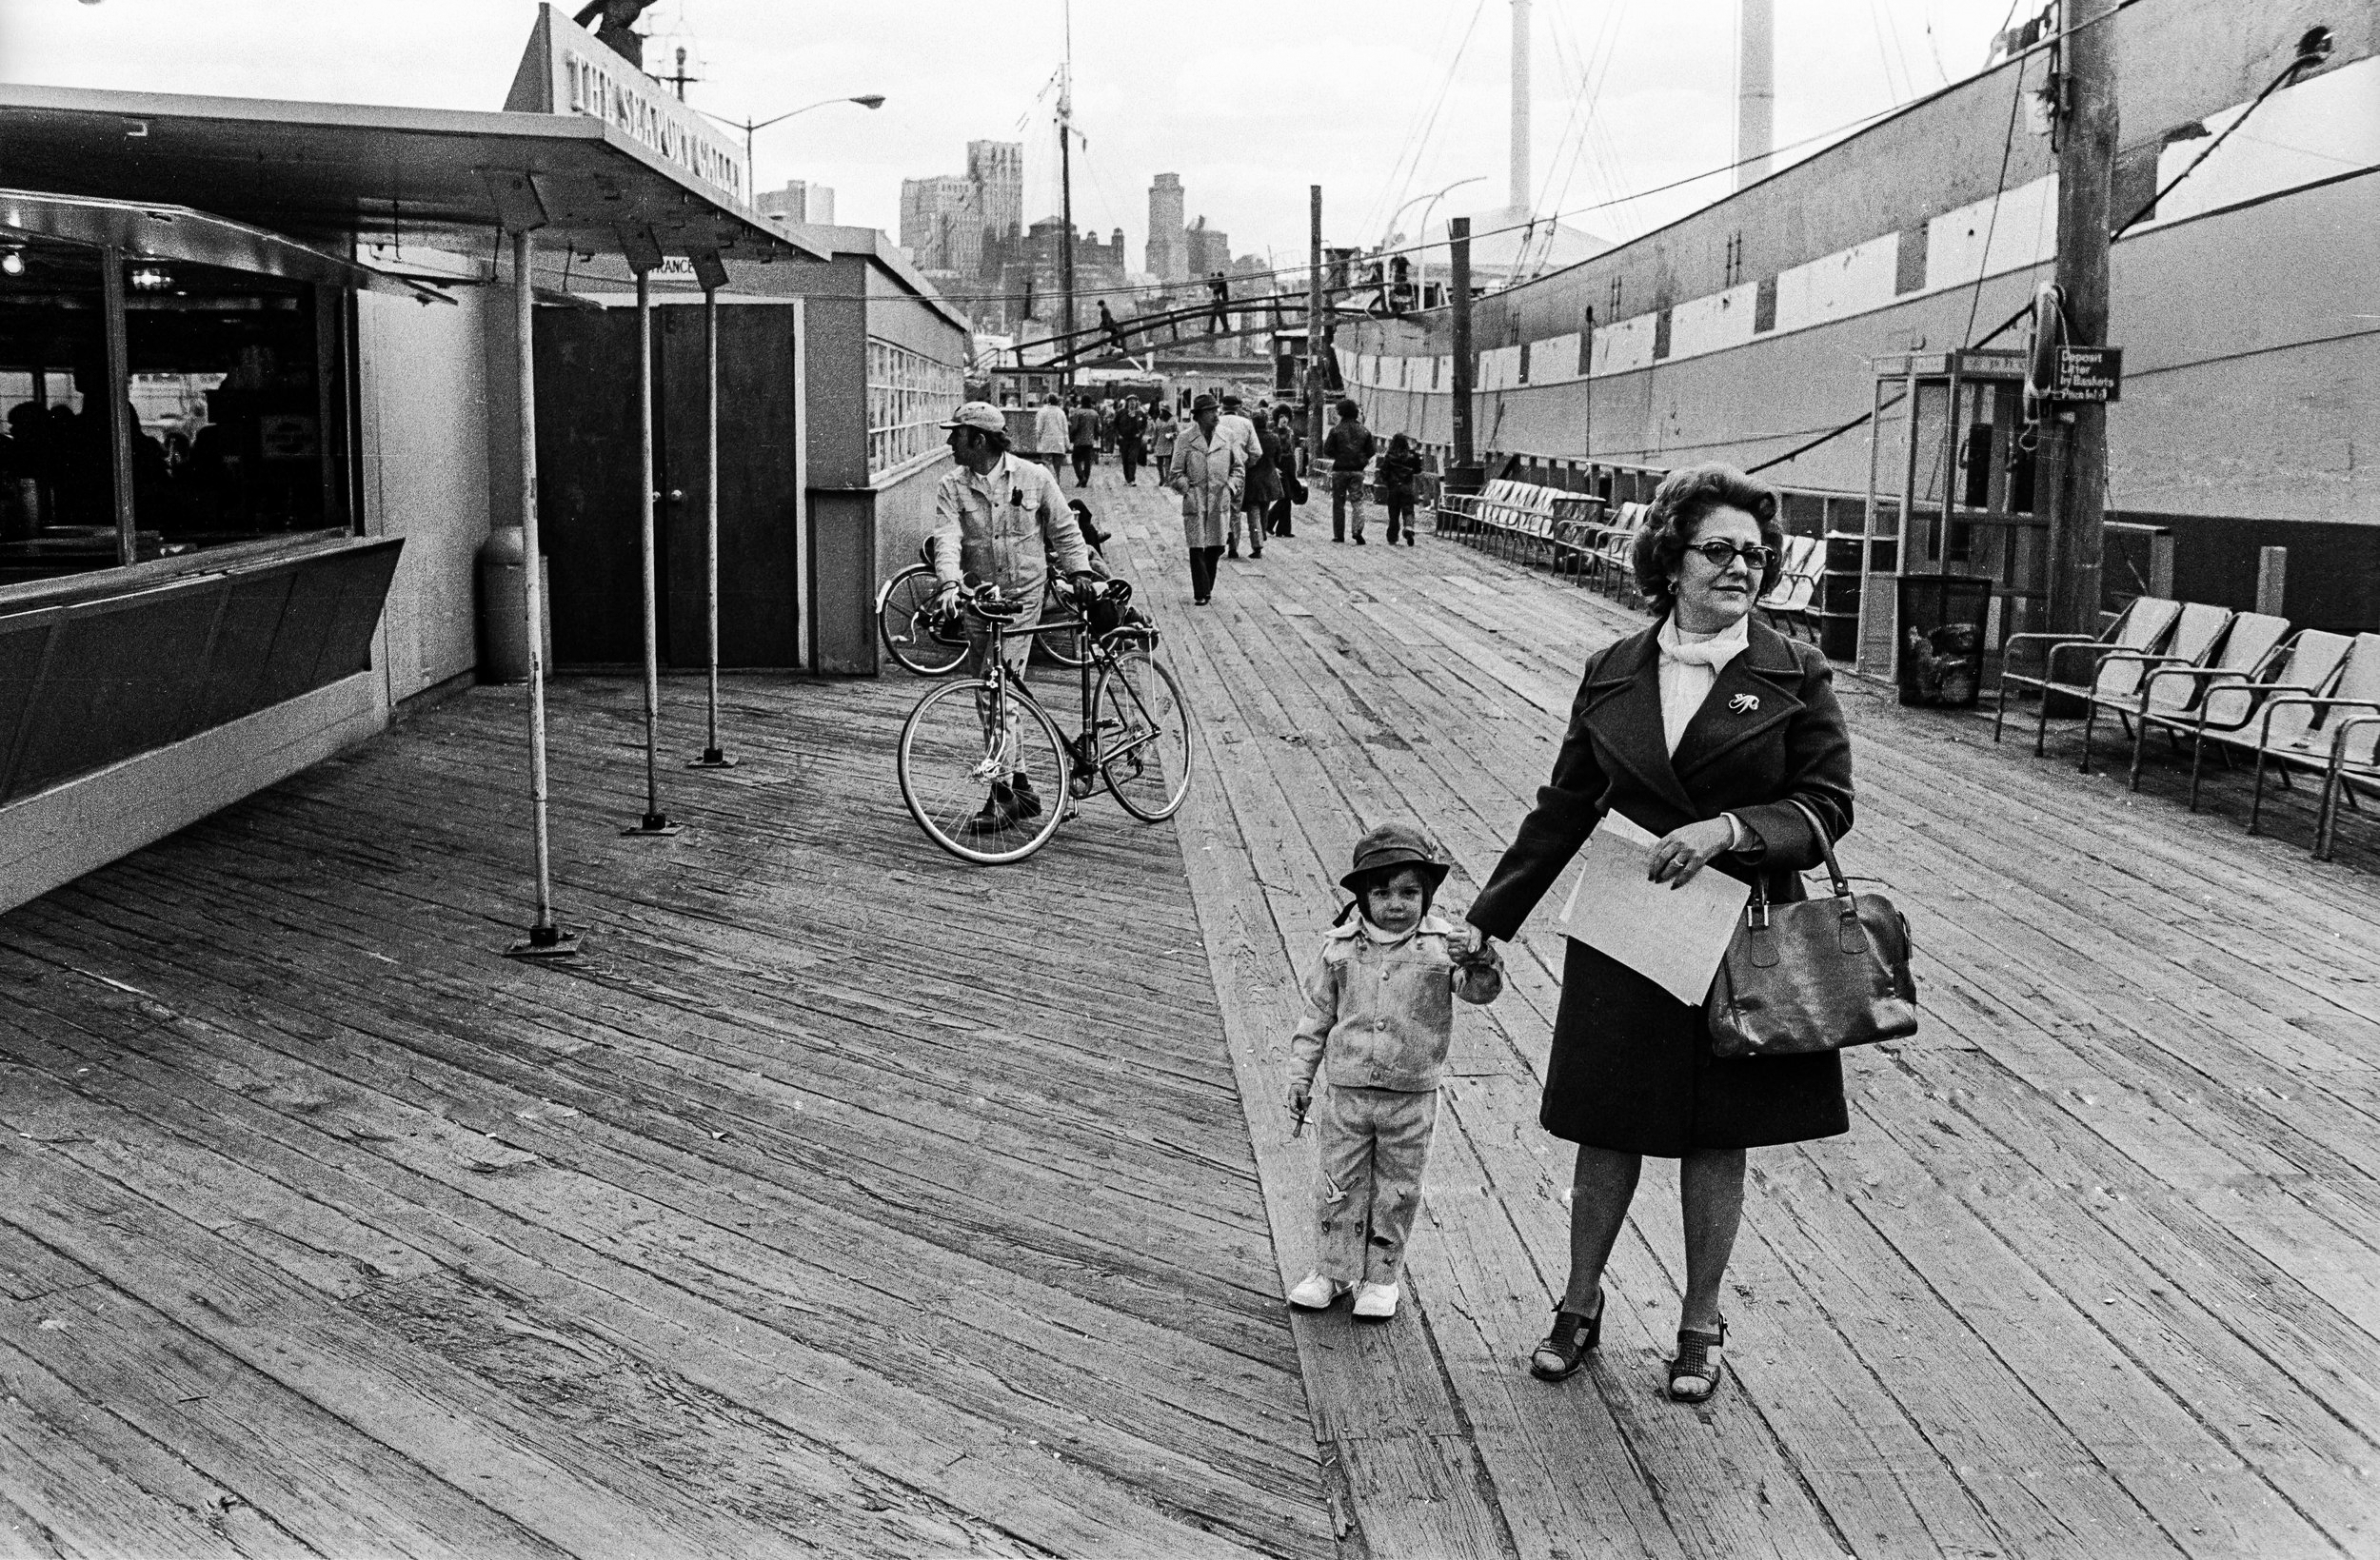   Mother and Son, South Street Seaport, 1975  